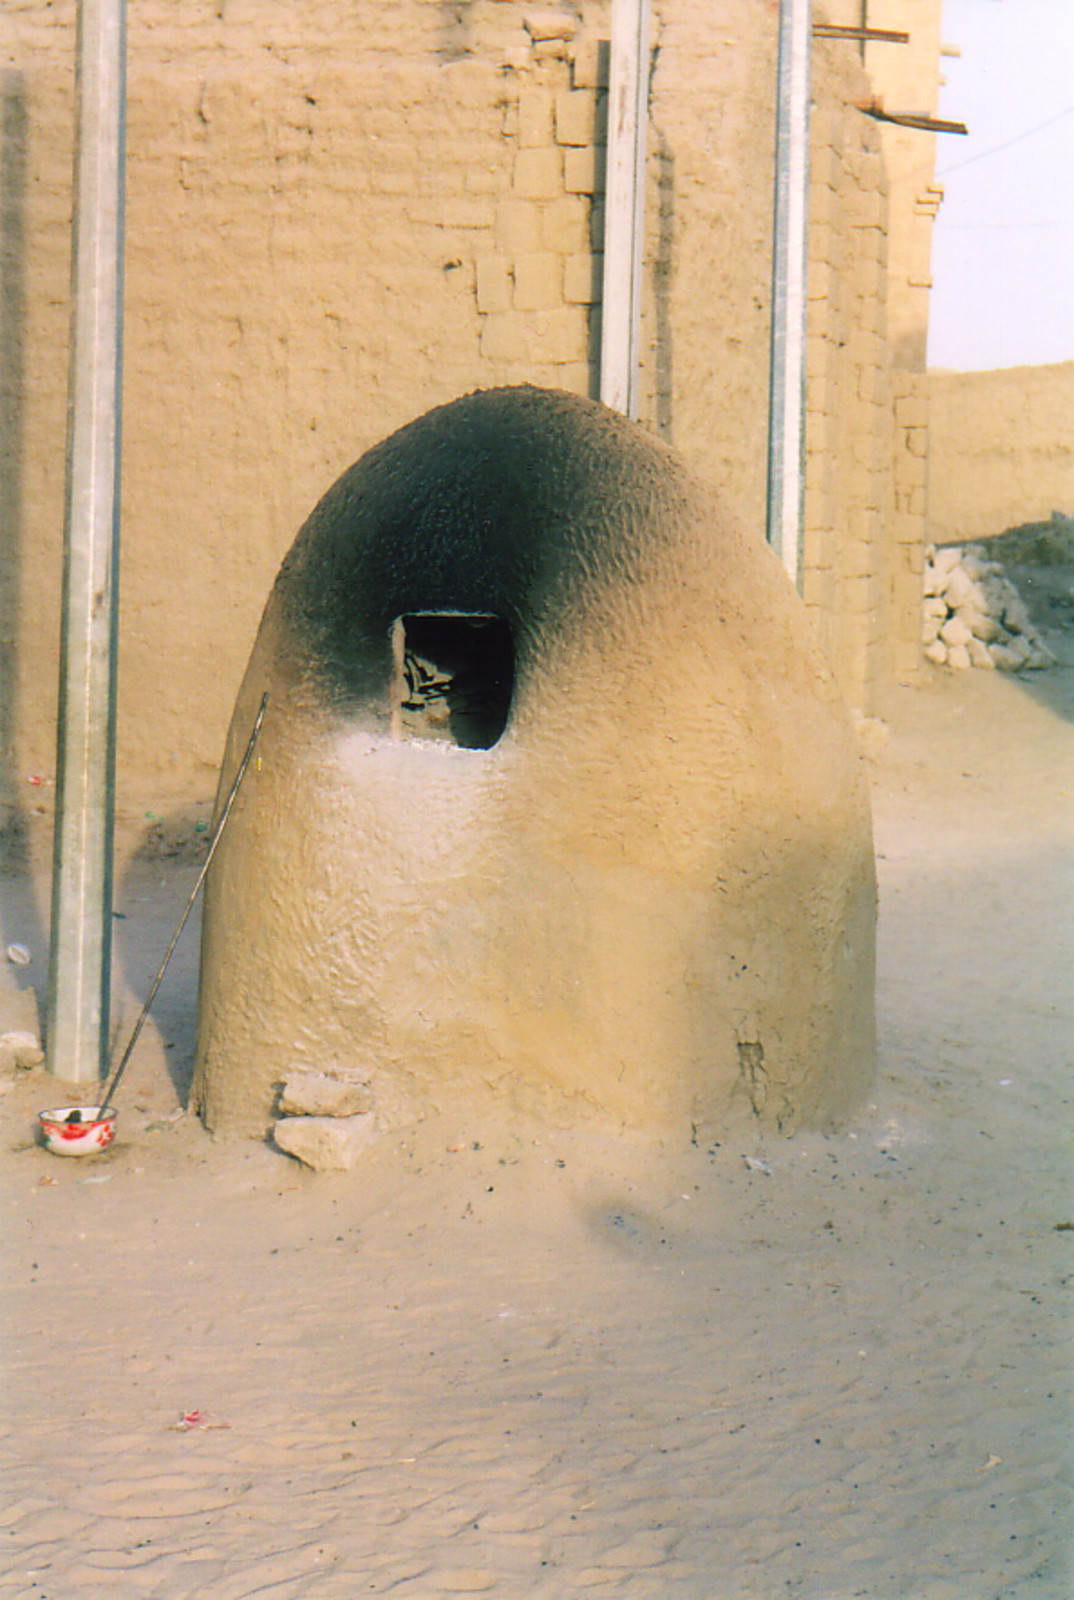 A wood-fired oven in the streets of Timbuktu